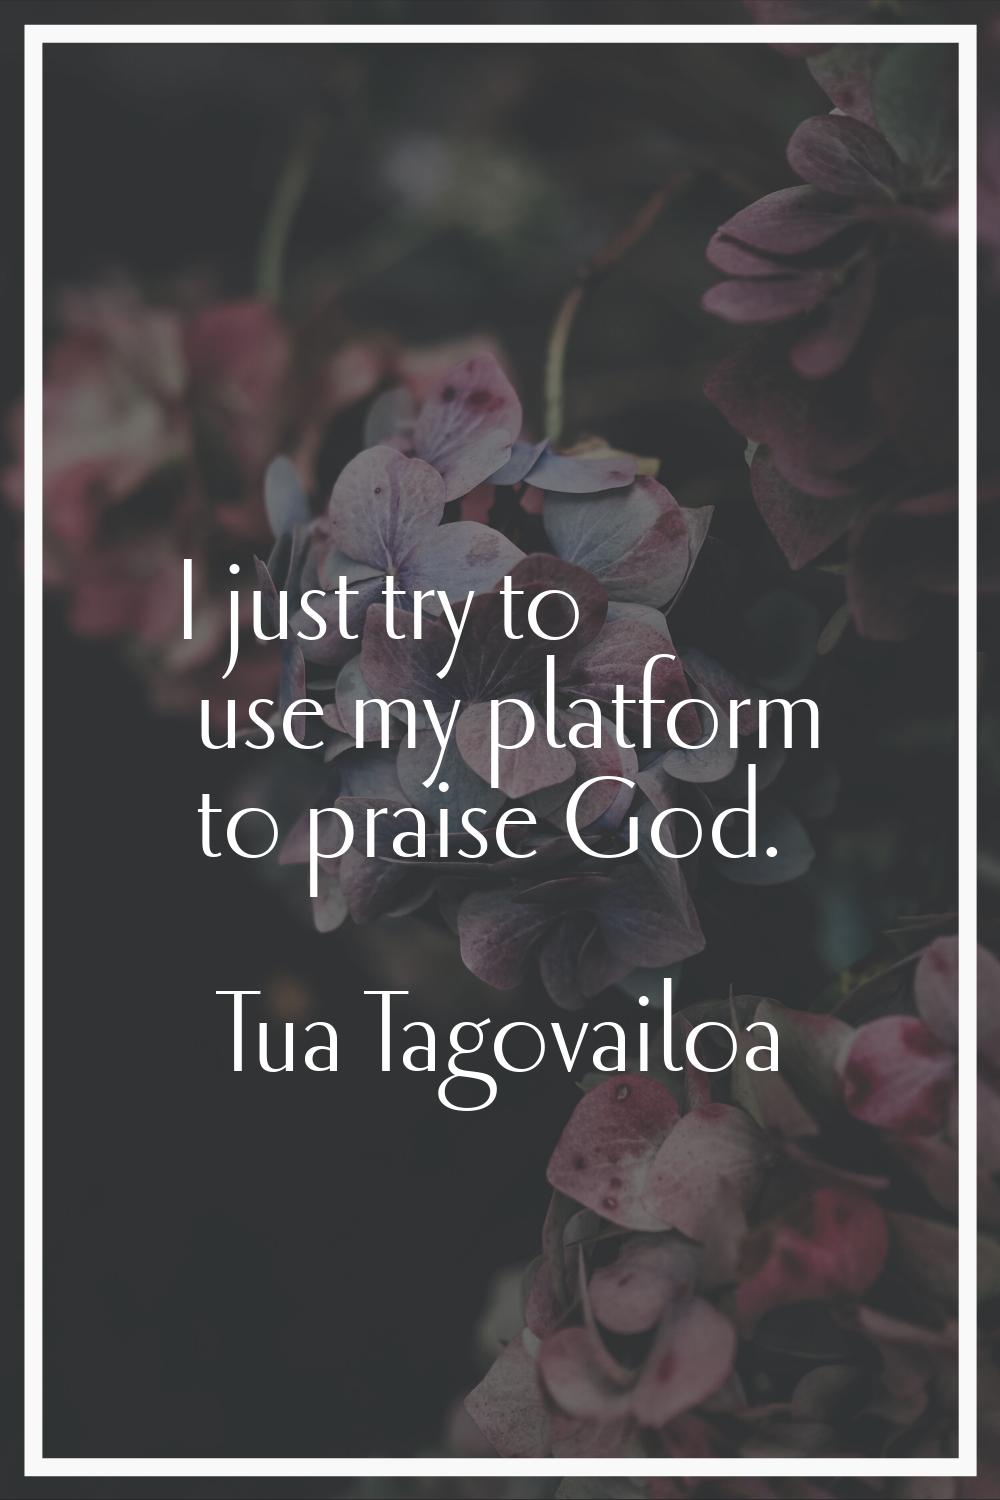 I just try to use my platform to praise God.